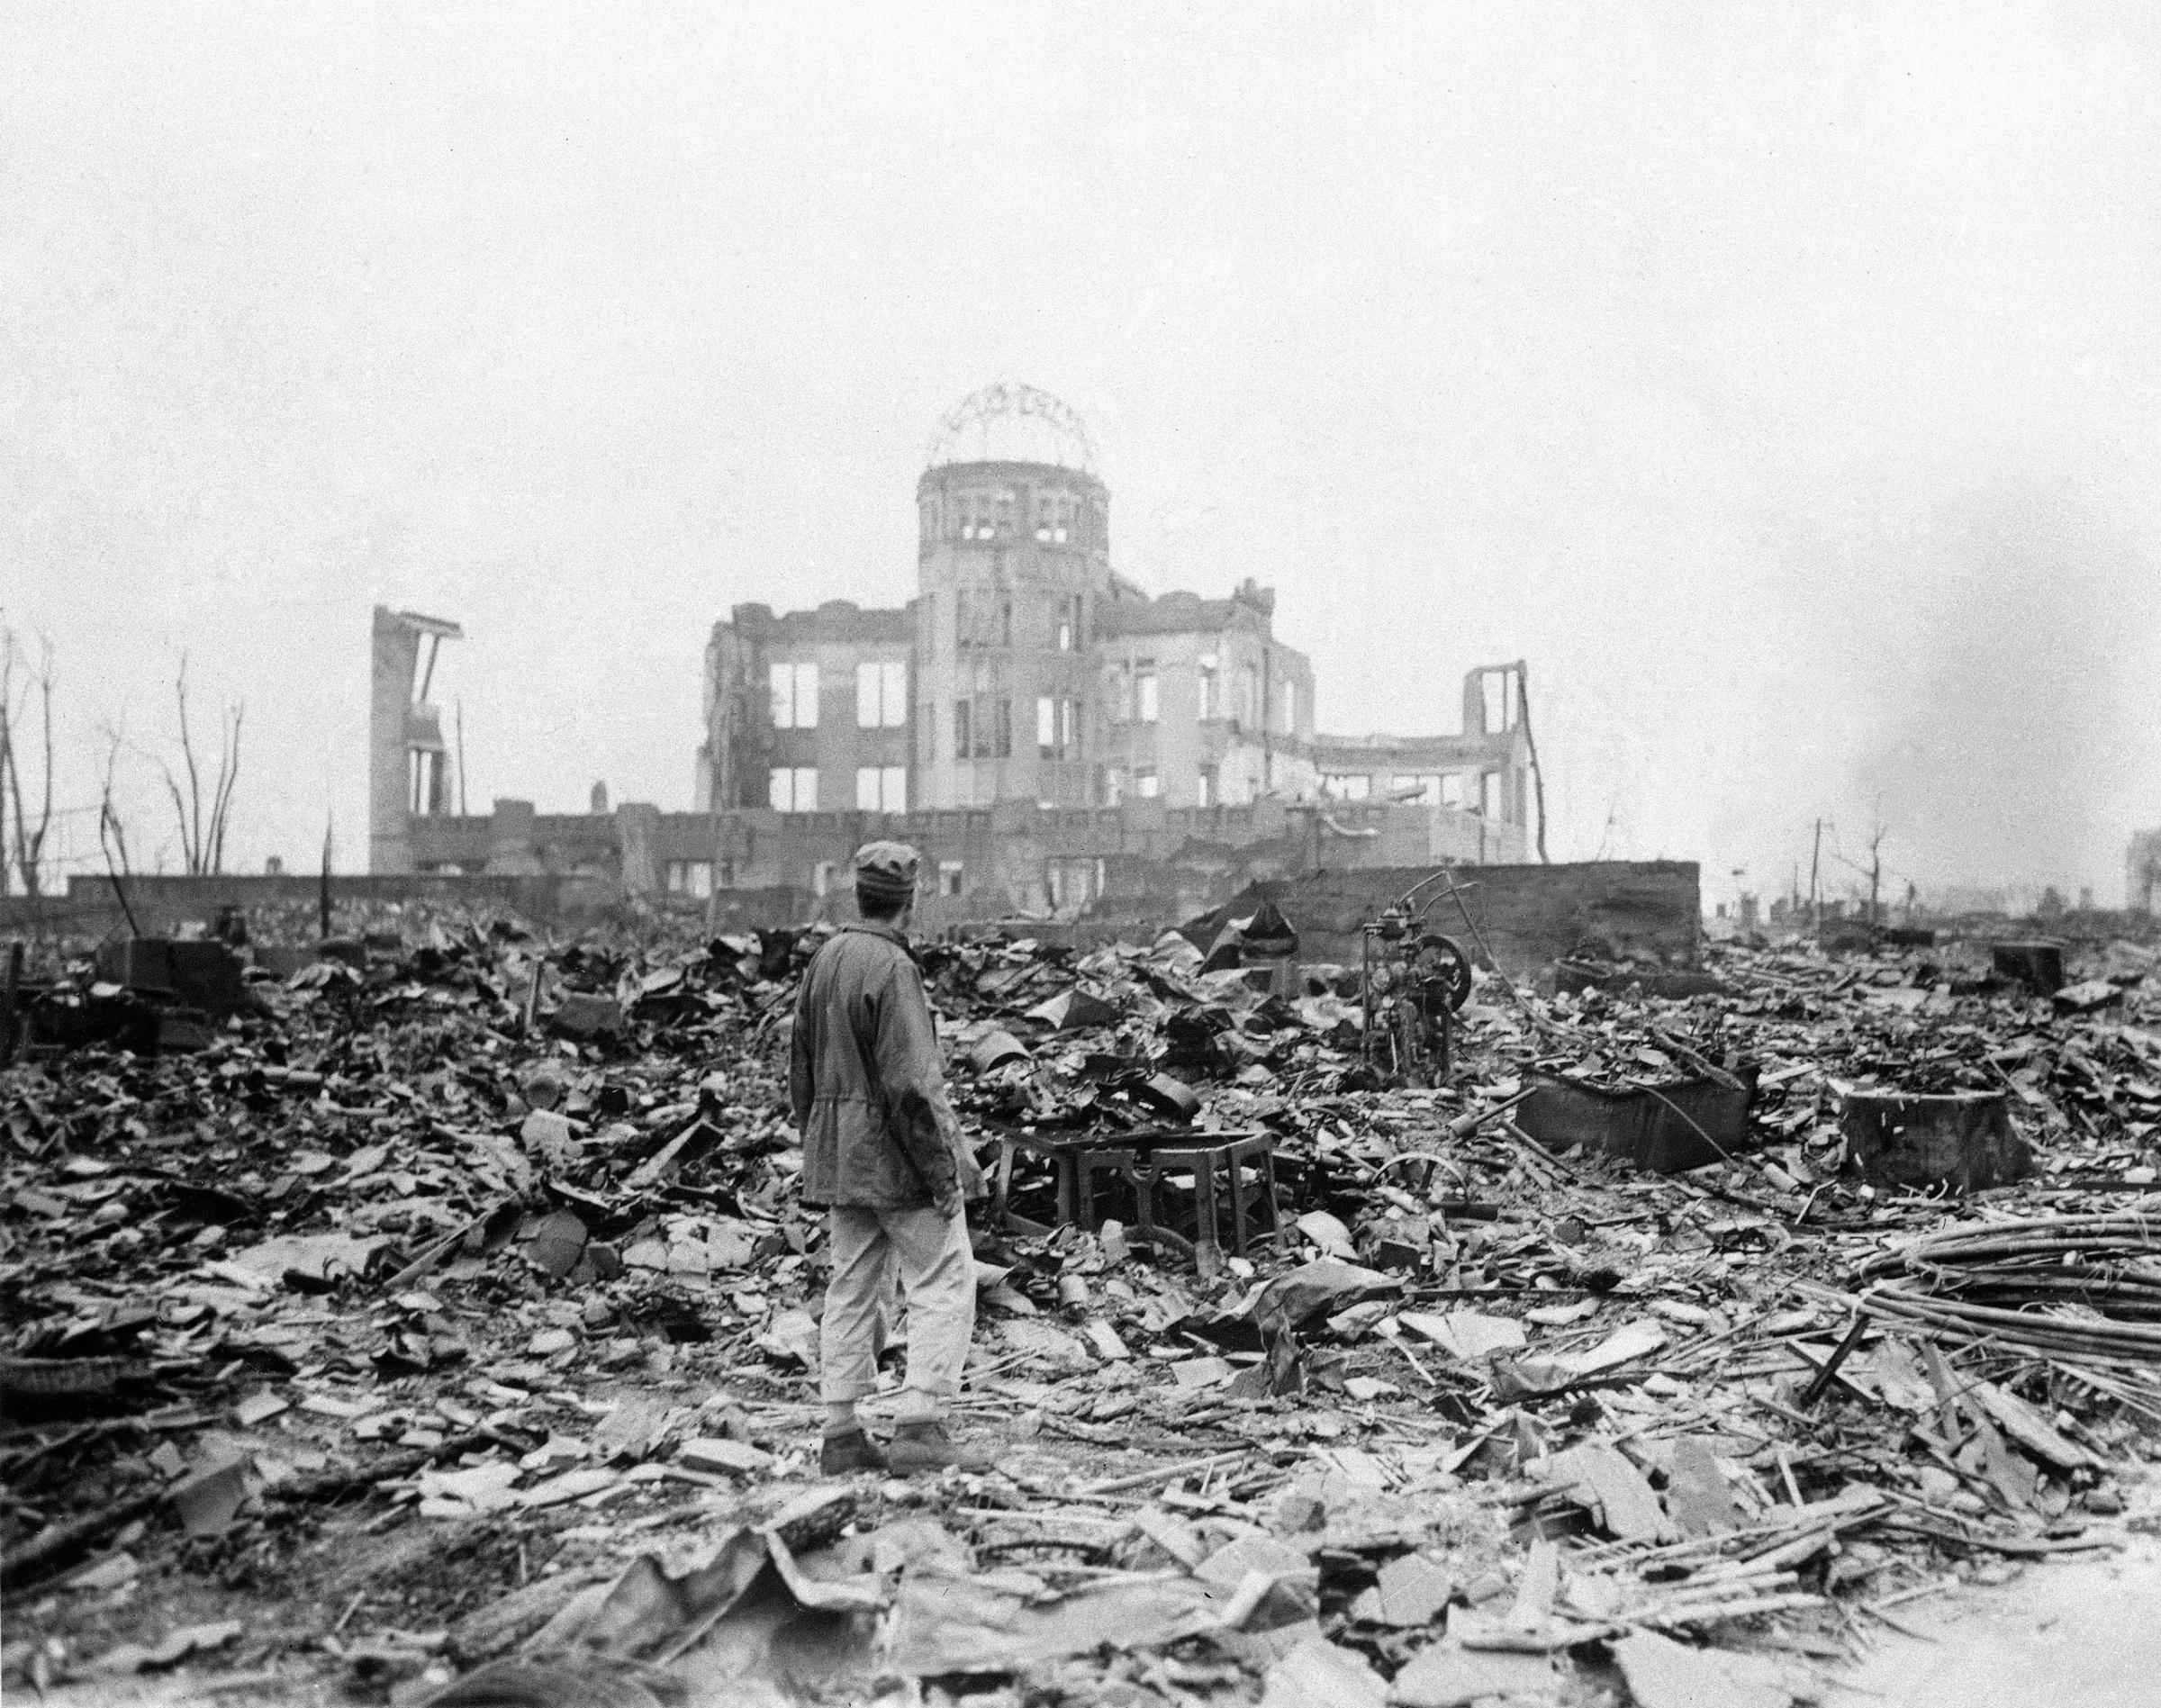 September 8, 1945, an allied correspondent stands in the rubble in front of the shell of a building that once was a movie theater in Hiroshima, Japan, a month after the first atomic bomb ever used in warfare was dropped by the U.S. on Aug. 6, 1945.The damaged building standing in the background is the Hiroshima Prefectural Industrial Promotion Hall, currently preserved as the Atomic Bomb Dome.